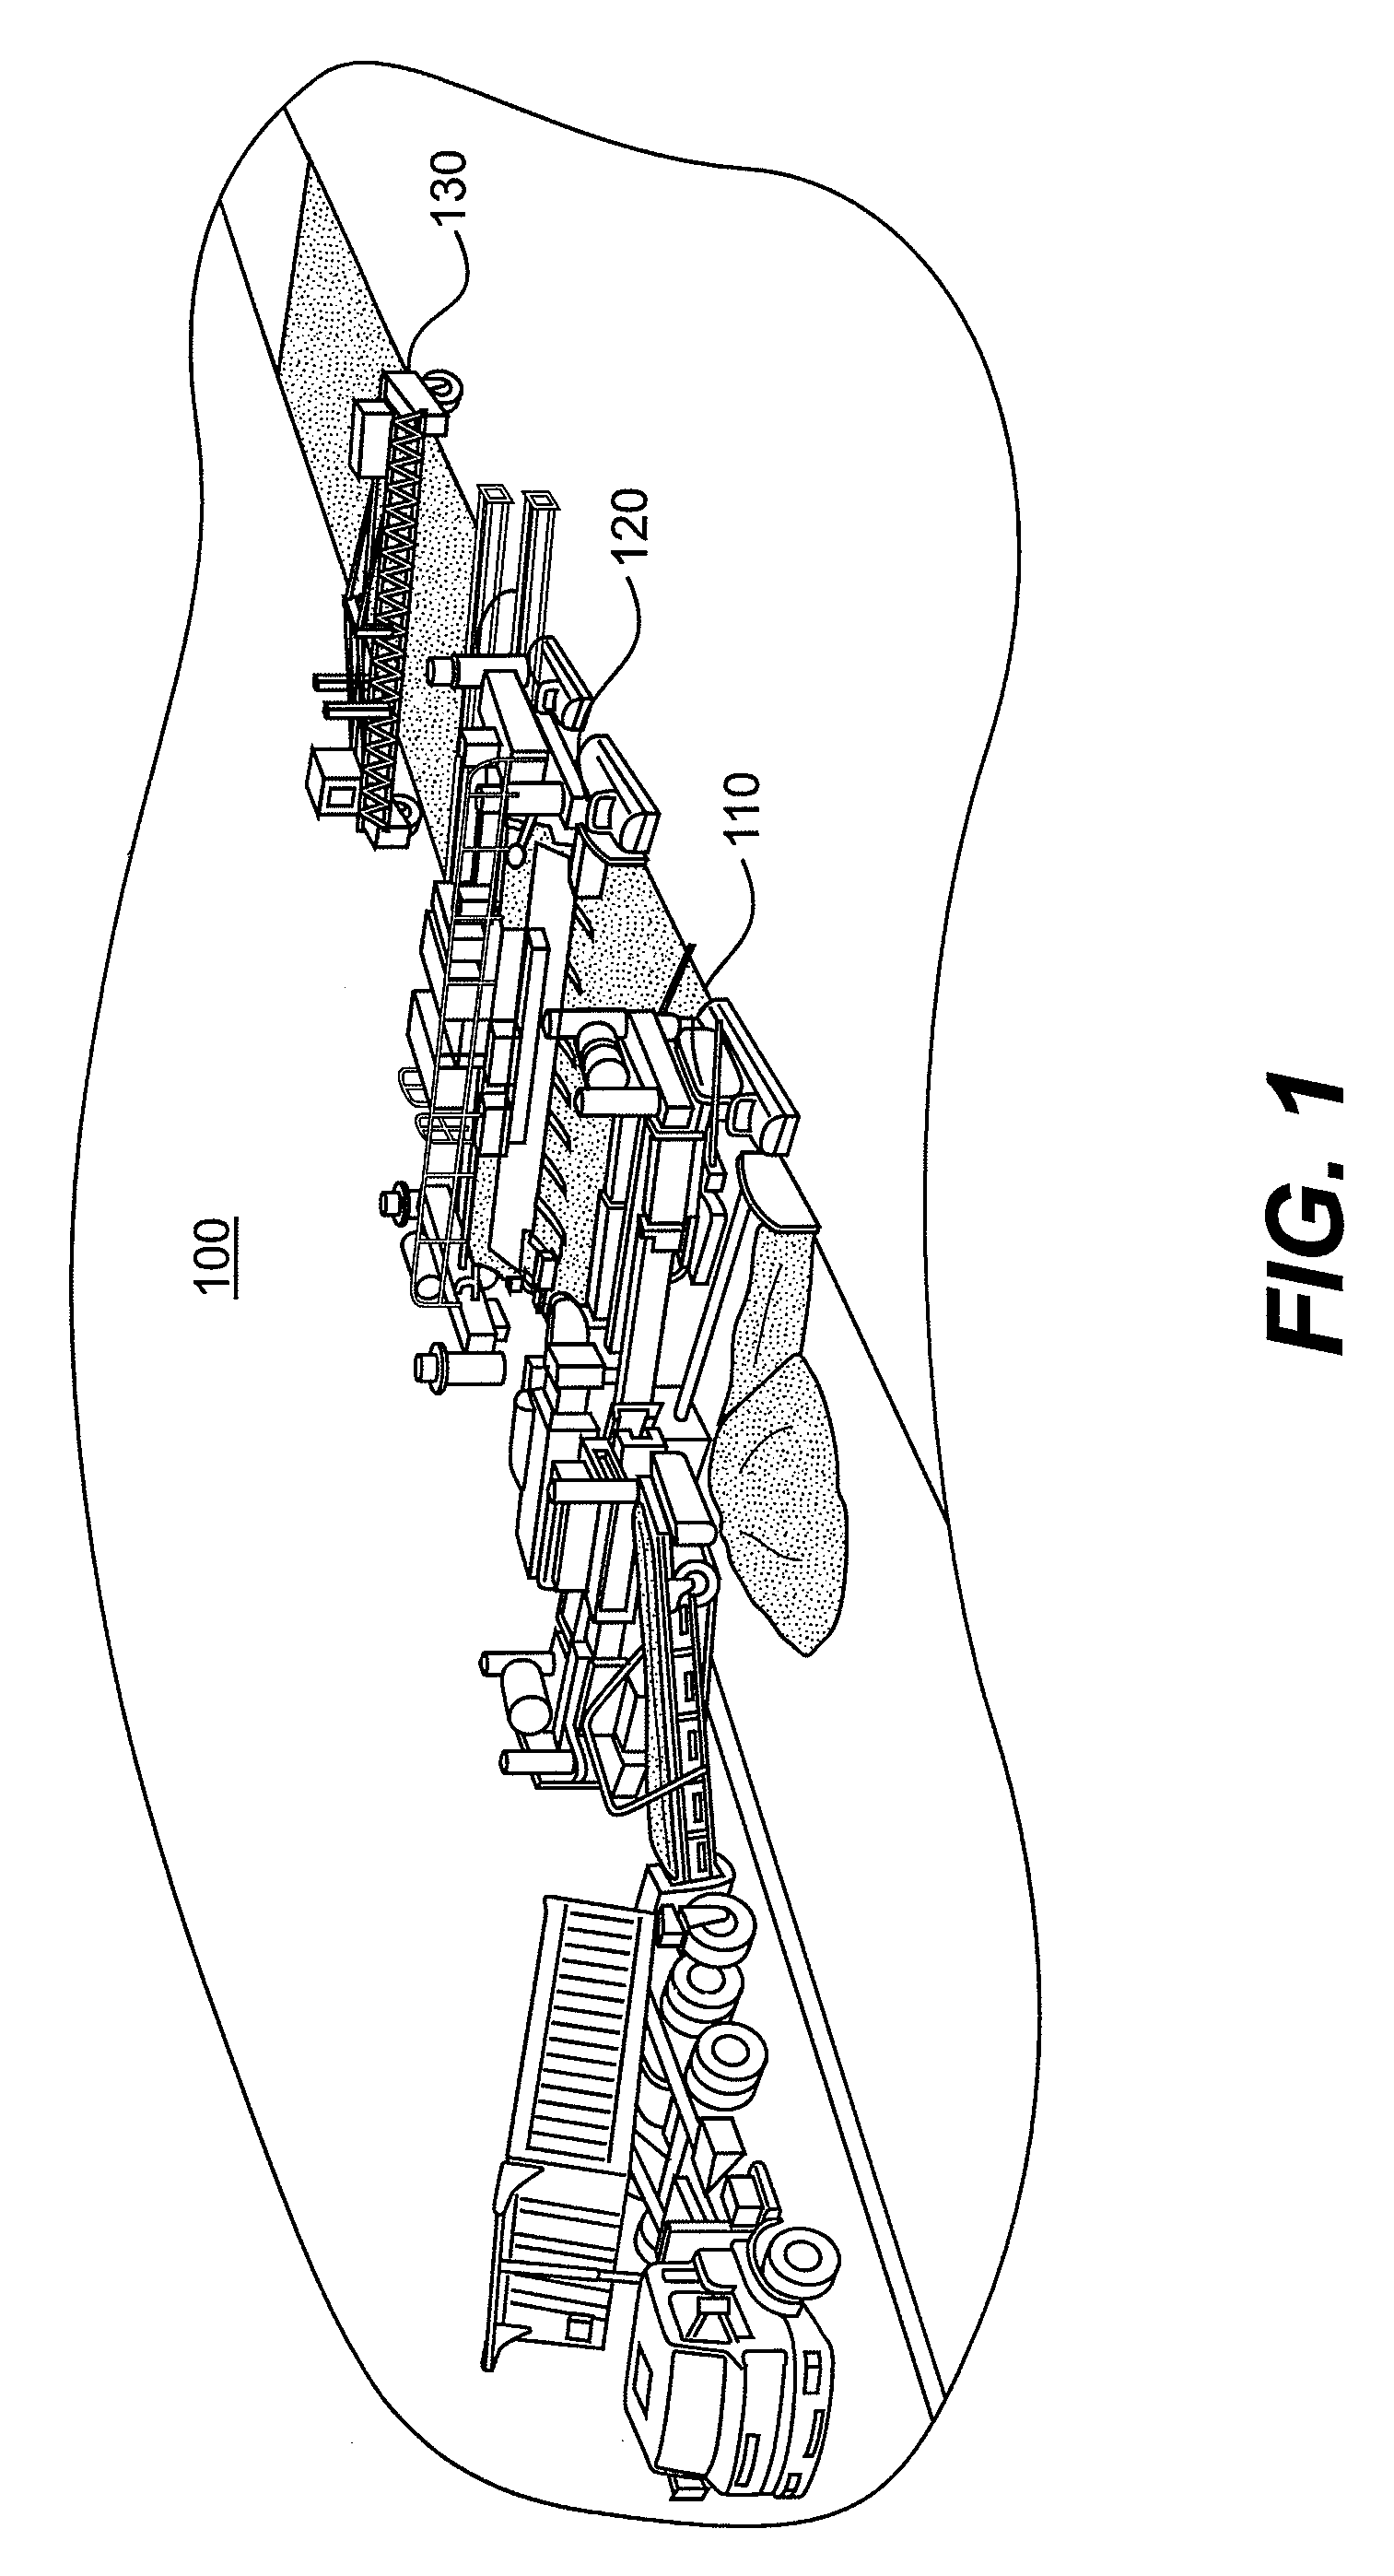 Method and apparatus to perform profile measurements on wet cement and to report discrepancies